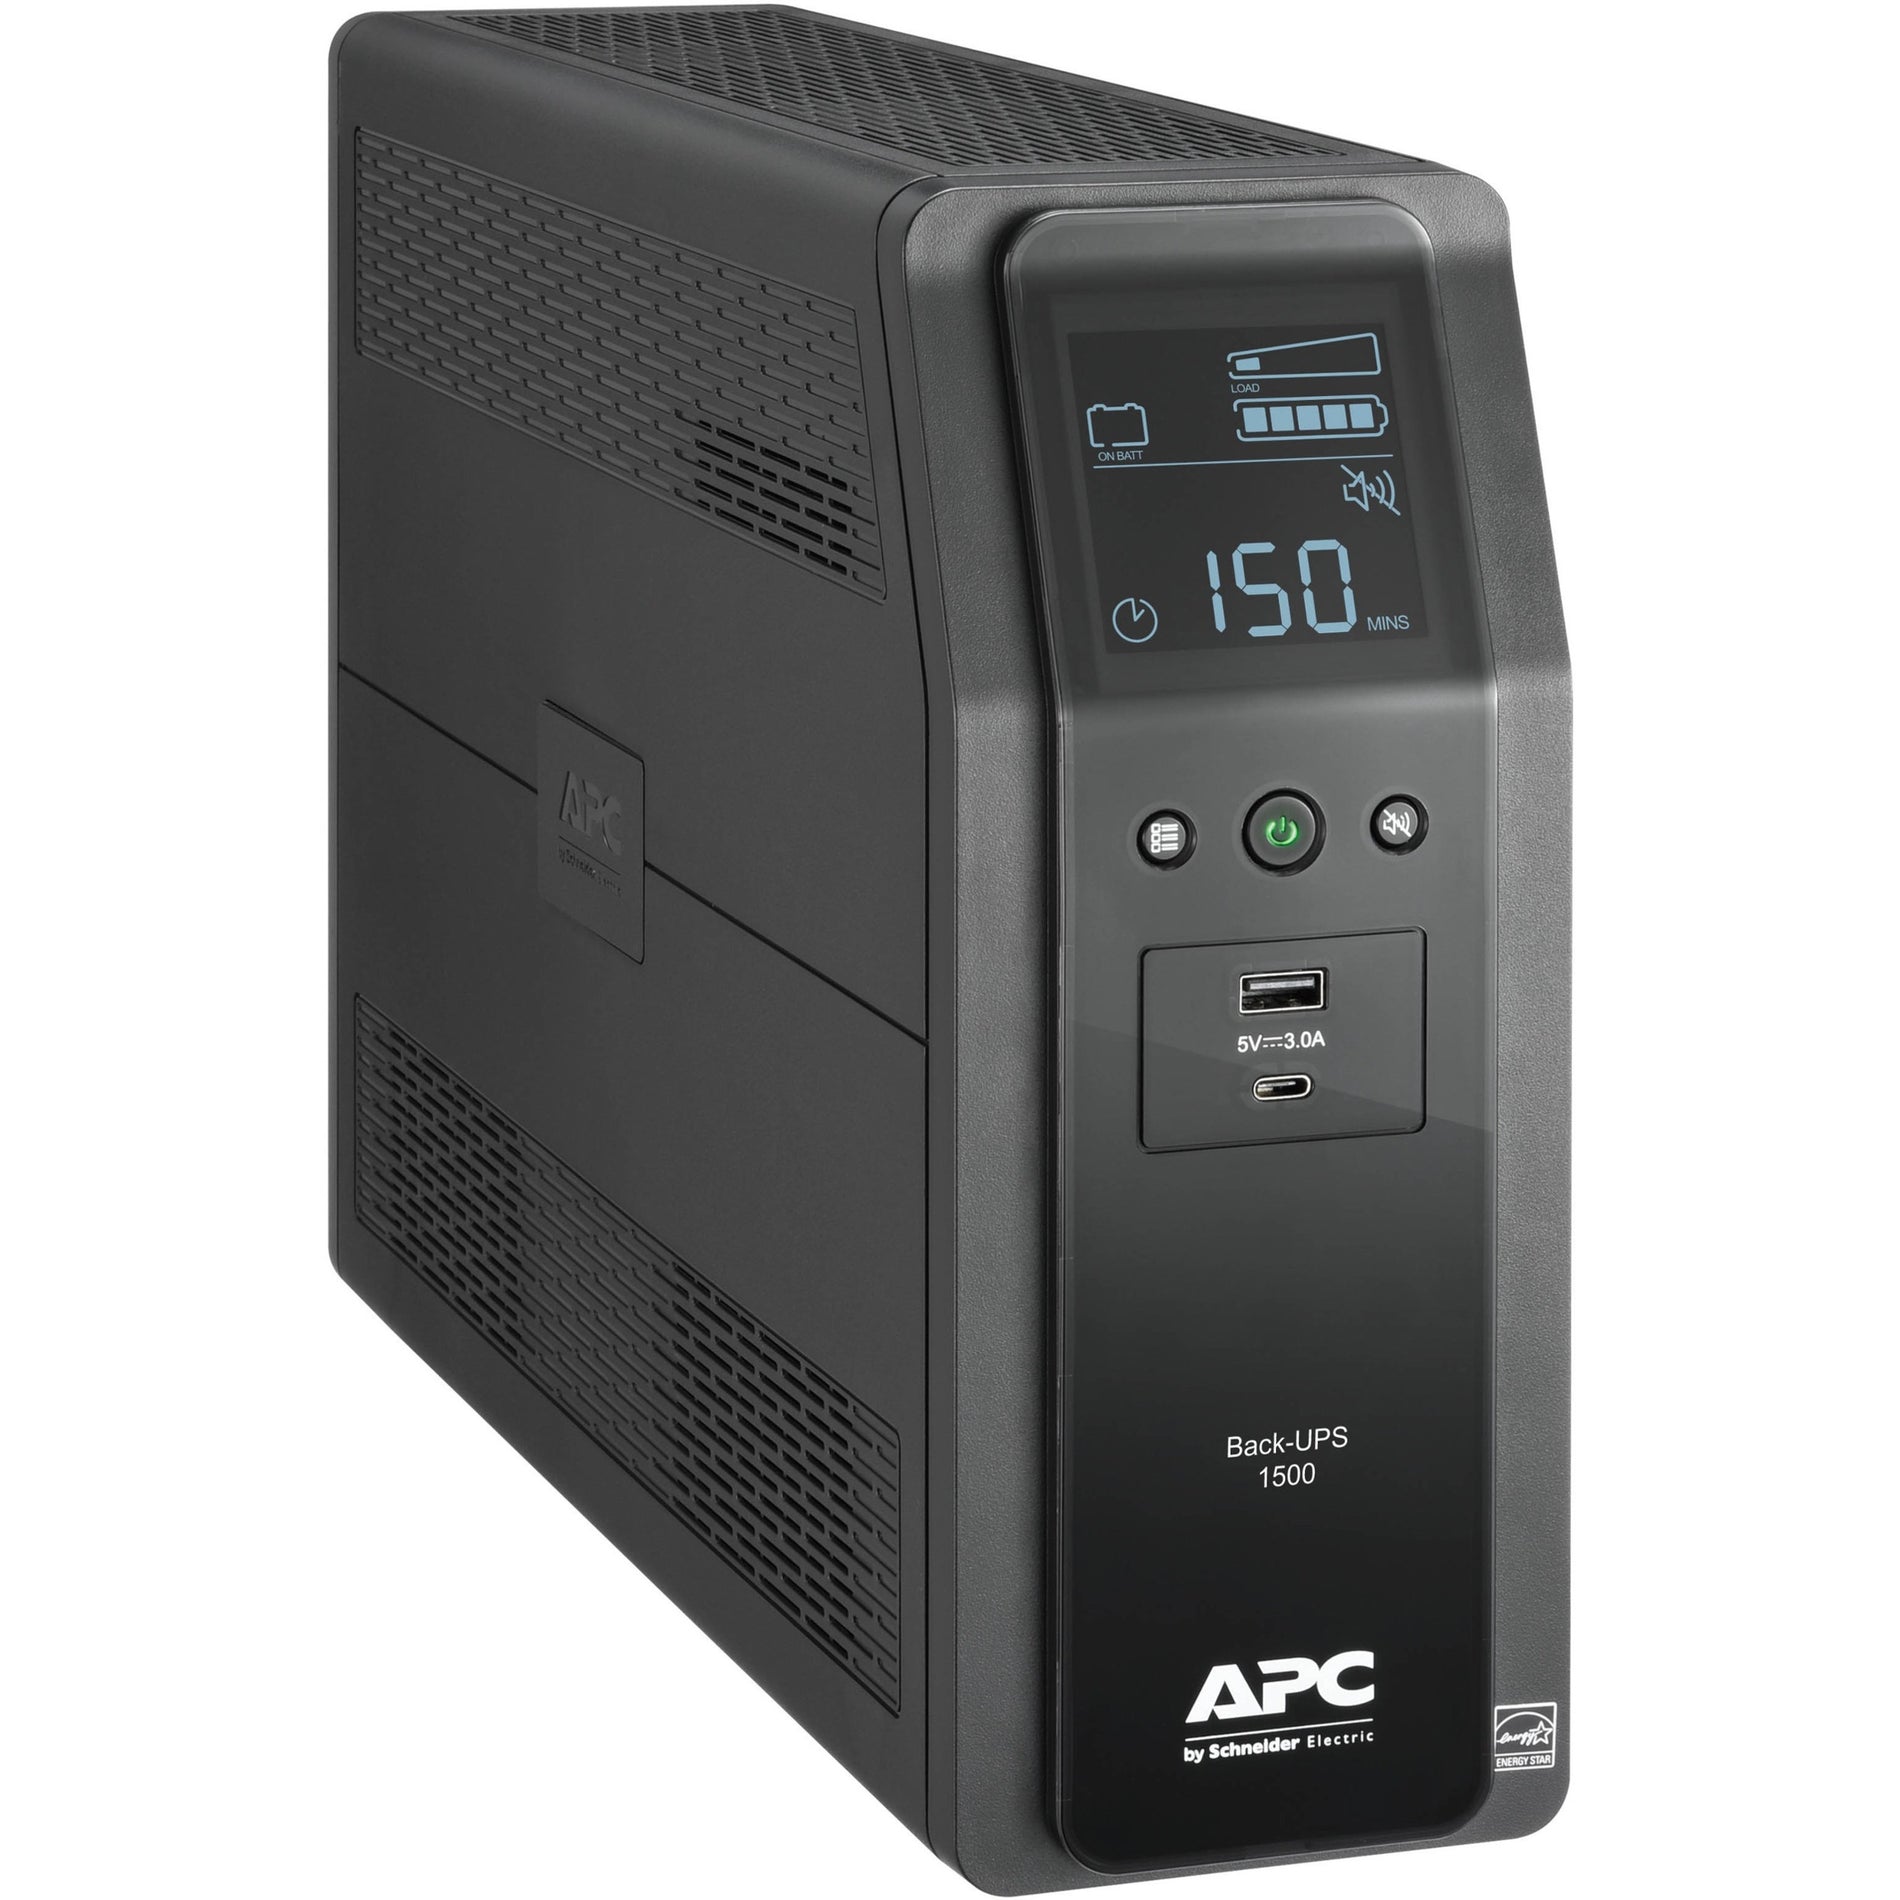 APC BN1500M2 Back-UPS Pro 1500VA, 10 Outlets, 2 USB Charging Ports, LCD Interface, Energy Star